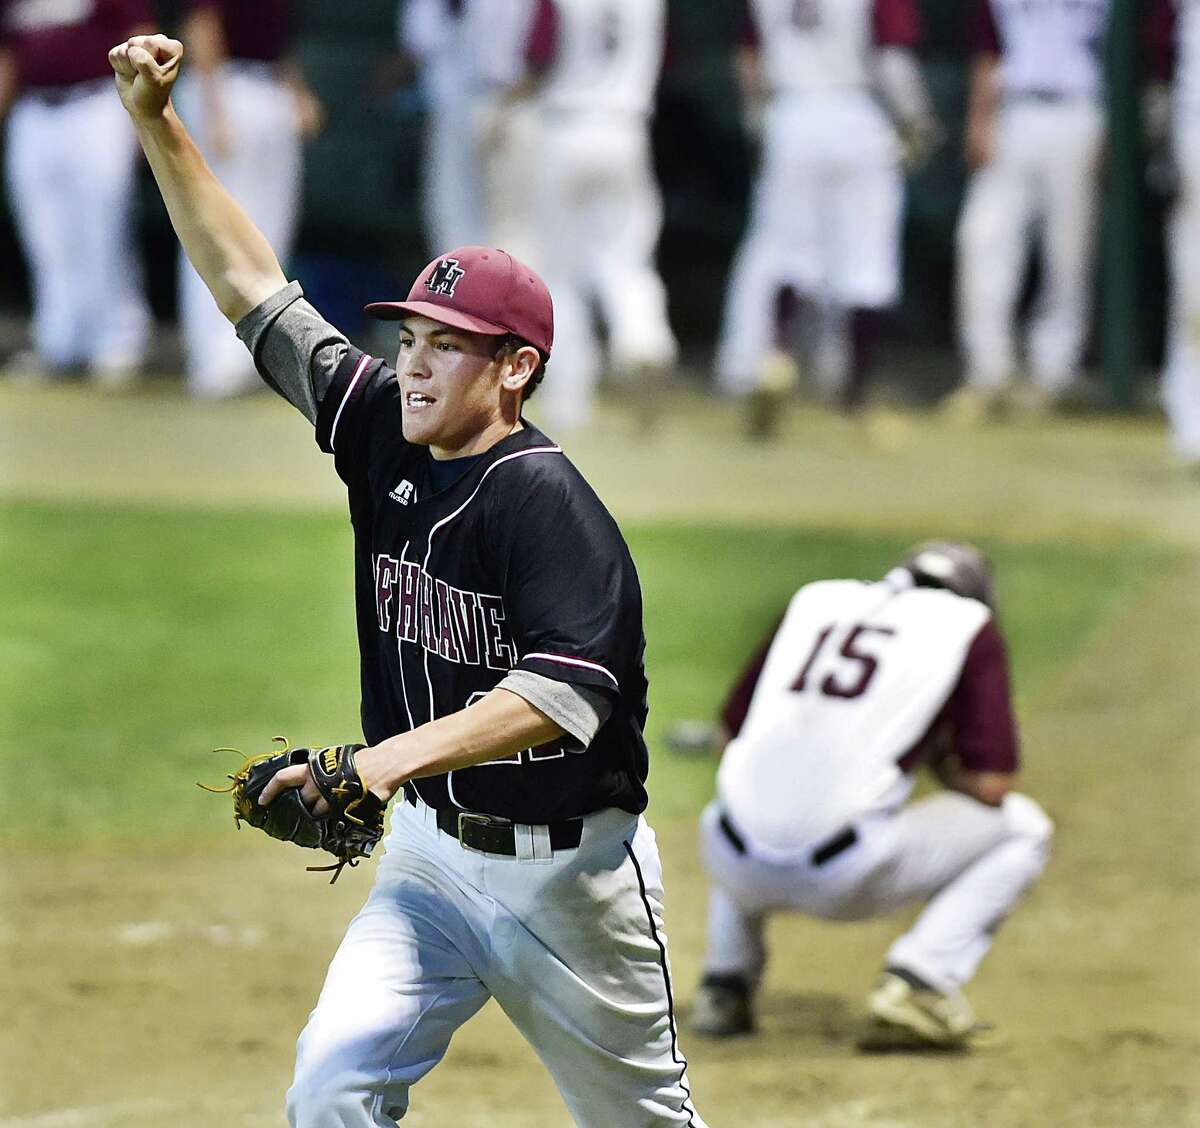 North Haven pitcher Richie DePalma celebrates after East Lyme’s Corey Levesque is called out at home. The North Haven Indians defeated the East Lyme Vikings, 3-2, in the Class L state championship game, Saturday night, June 13, 2015 at Palmer Field in Middletown. (Catherine Avalone/New Haven Register)